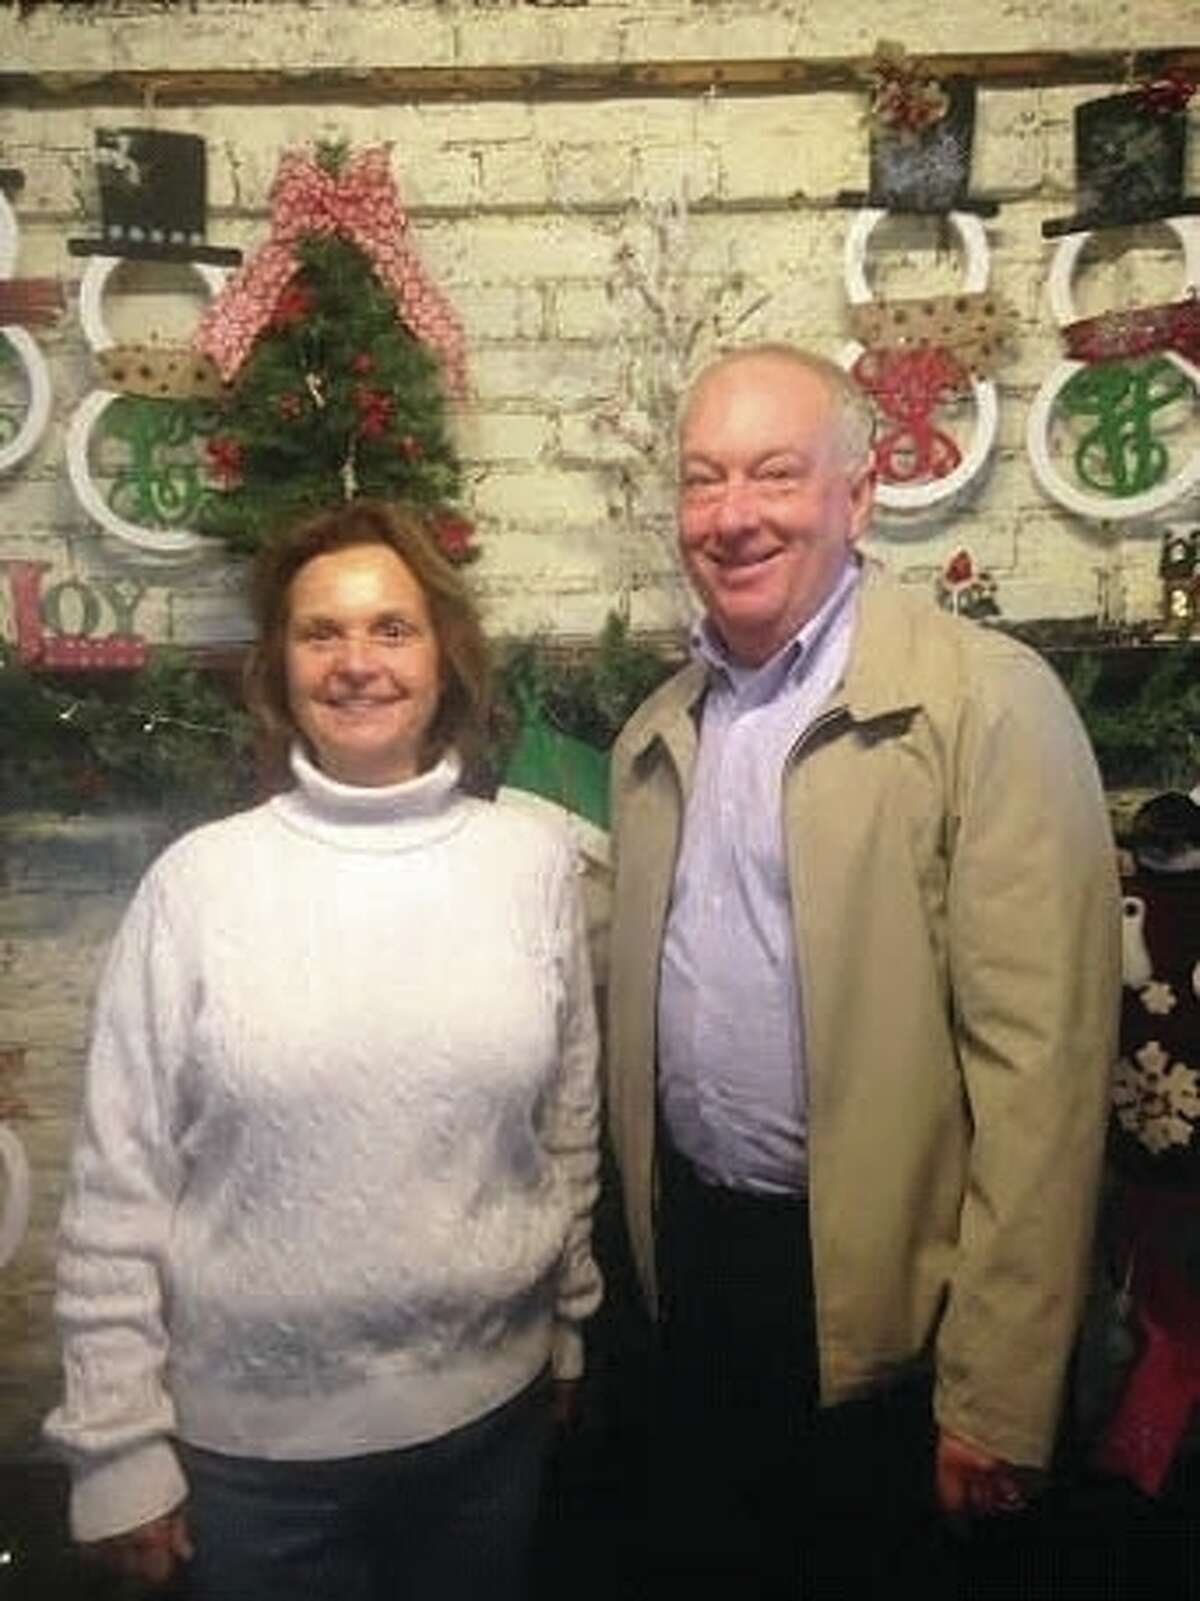 State Rep. Dan Beiser poses with the owner of 1904 General Store, Christine Velloff.